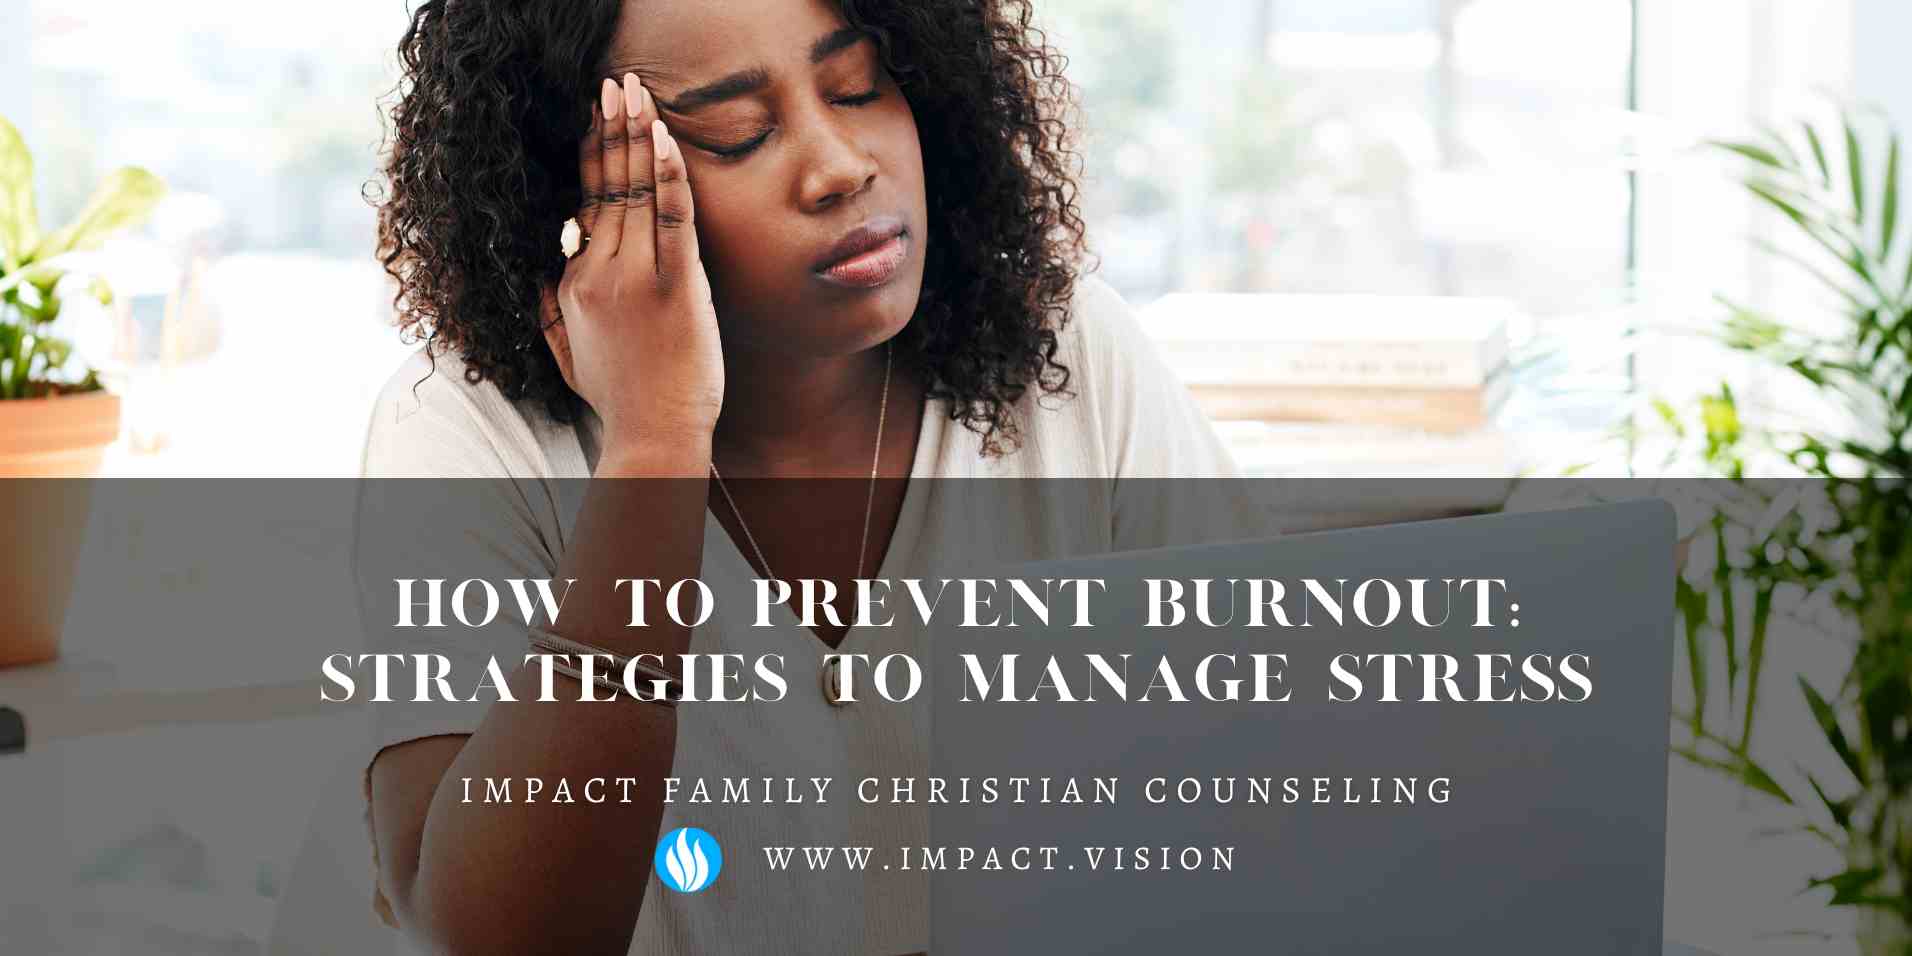 How to Prevent Burnout: Strategies to Manage Stress